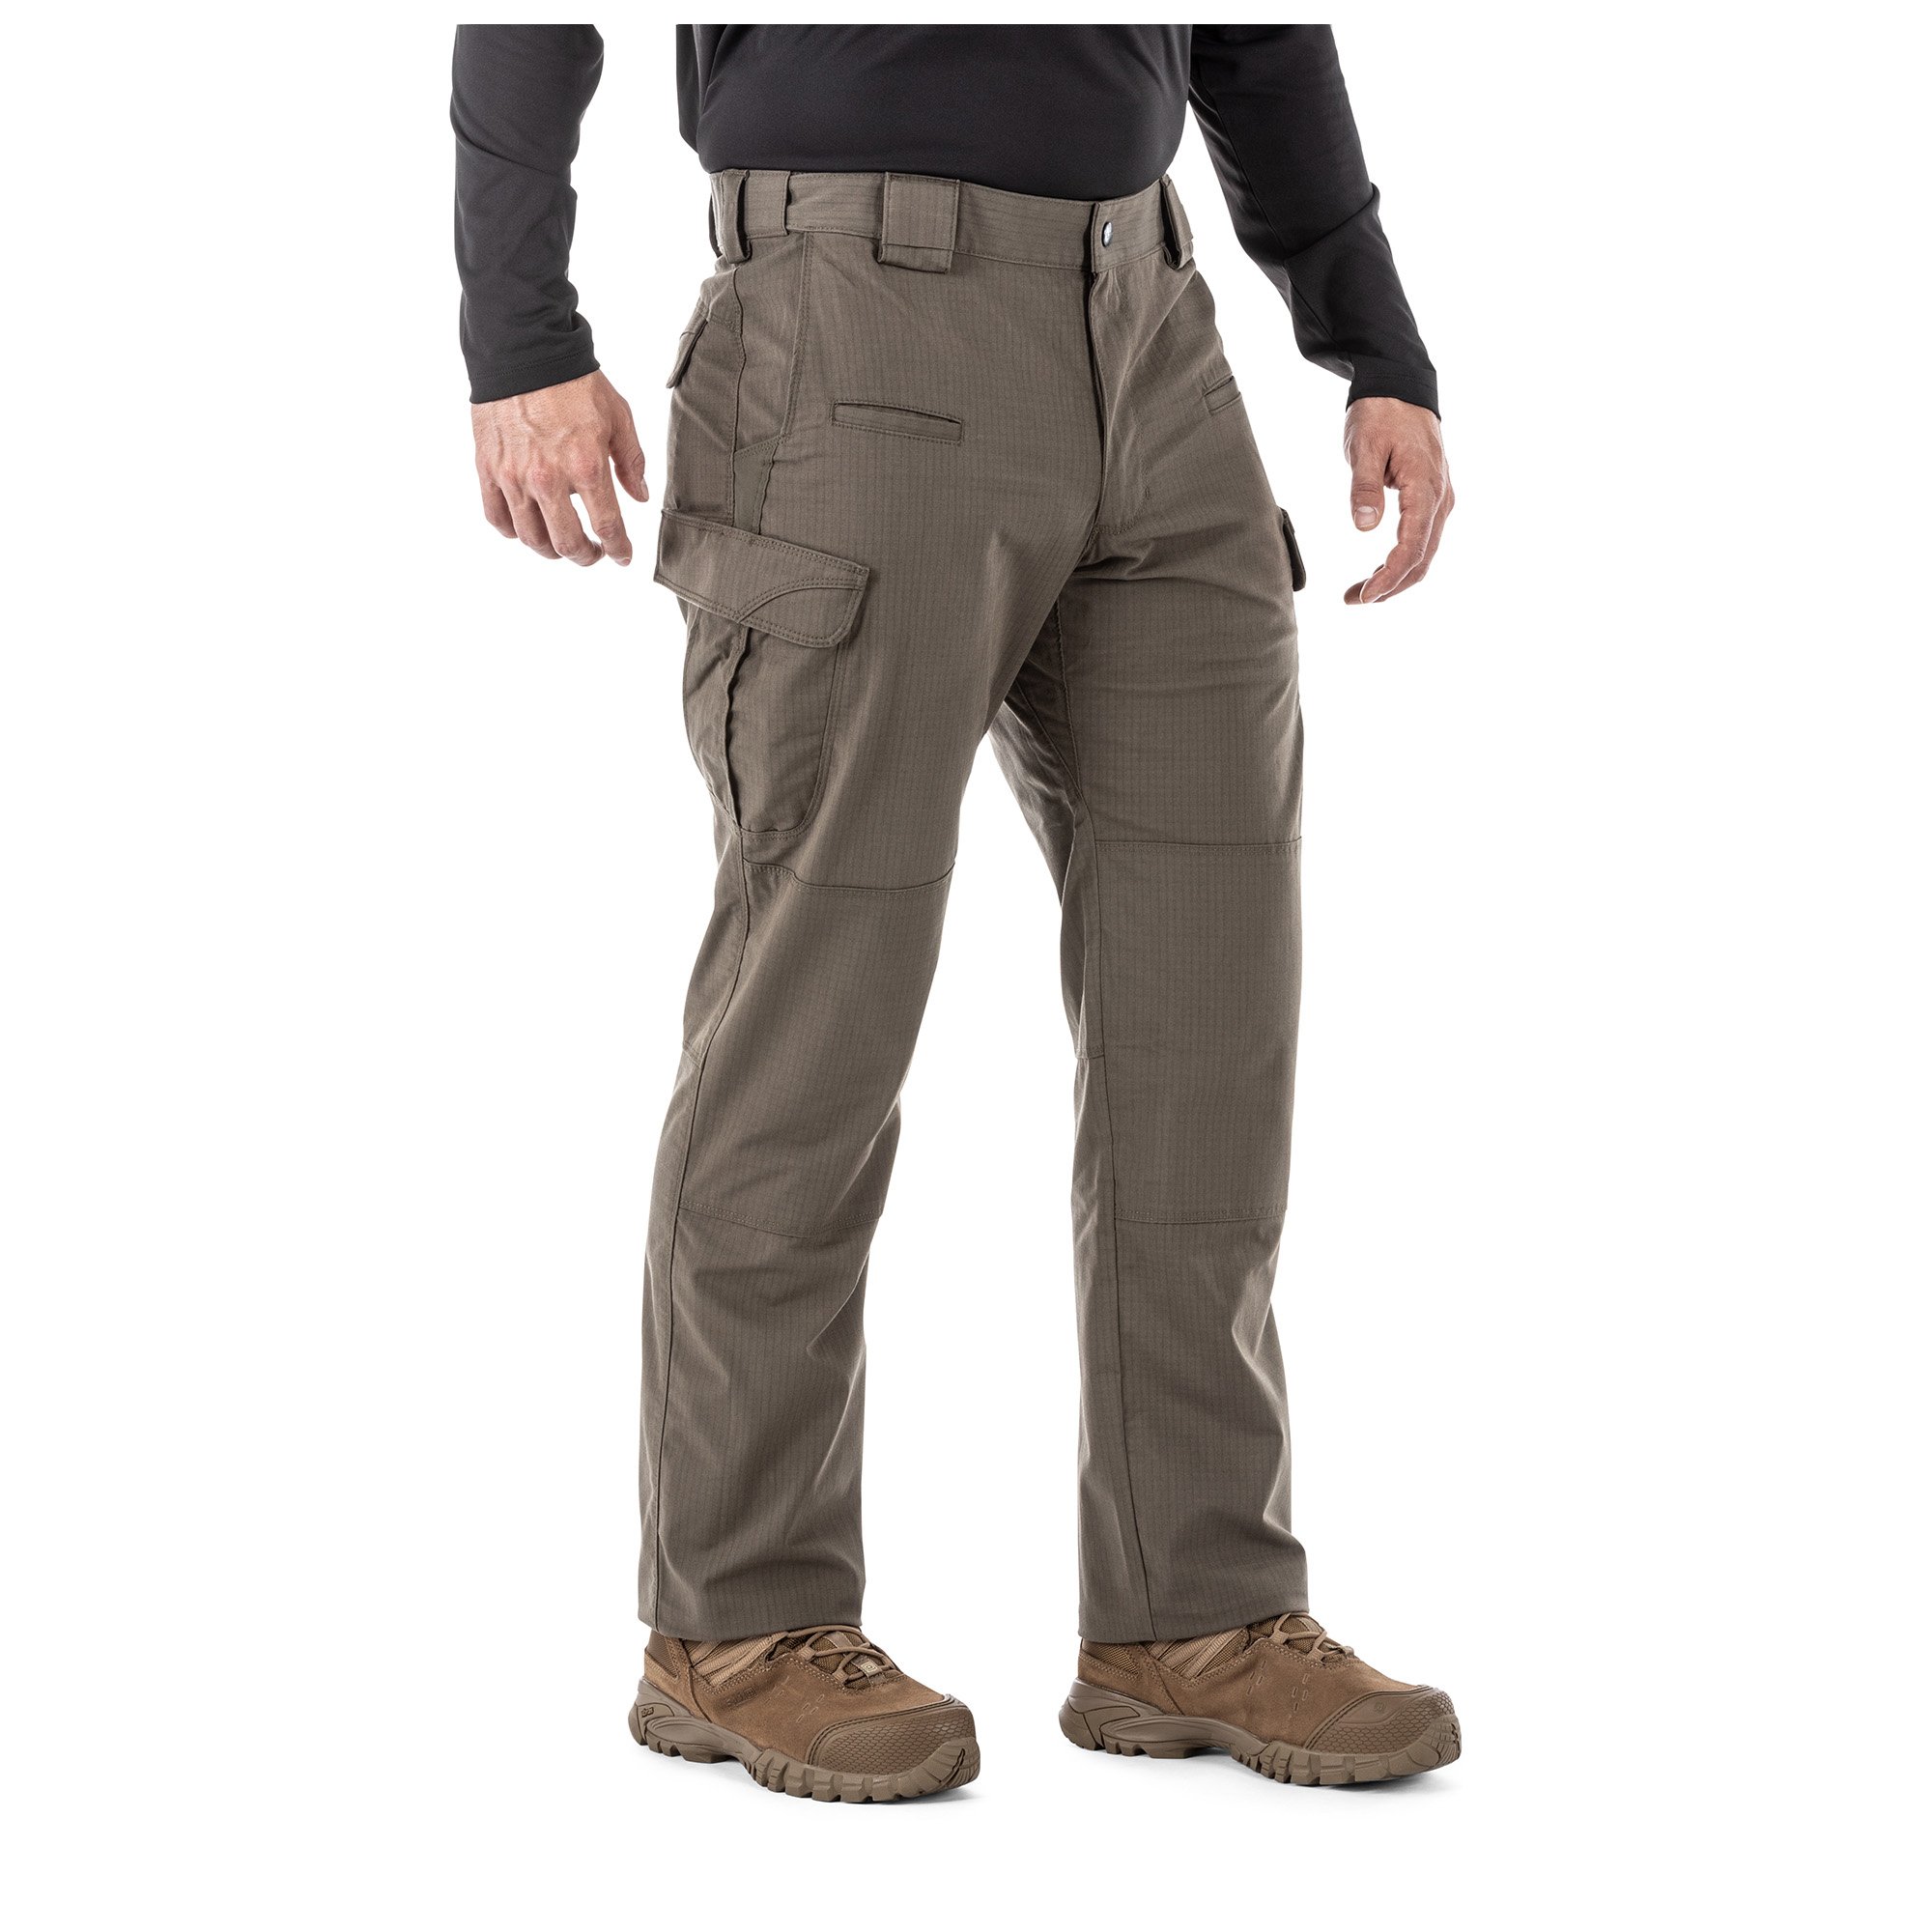 5.11 Work Gear Men's Stryke Pants, Adjustable Waistband, Stretchable Flex-Tac Fabric, Storm, 40W x 32L, Style 74369 - image 4 of 7